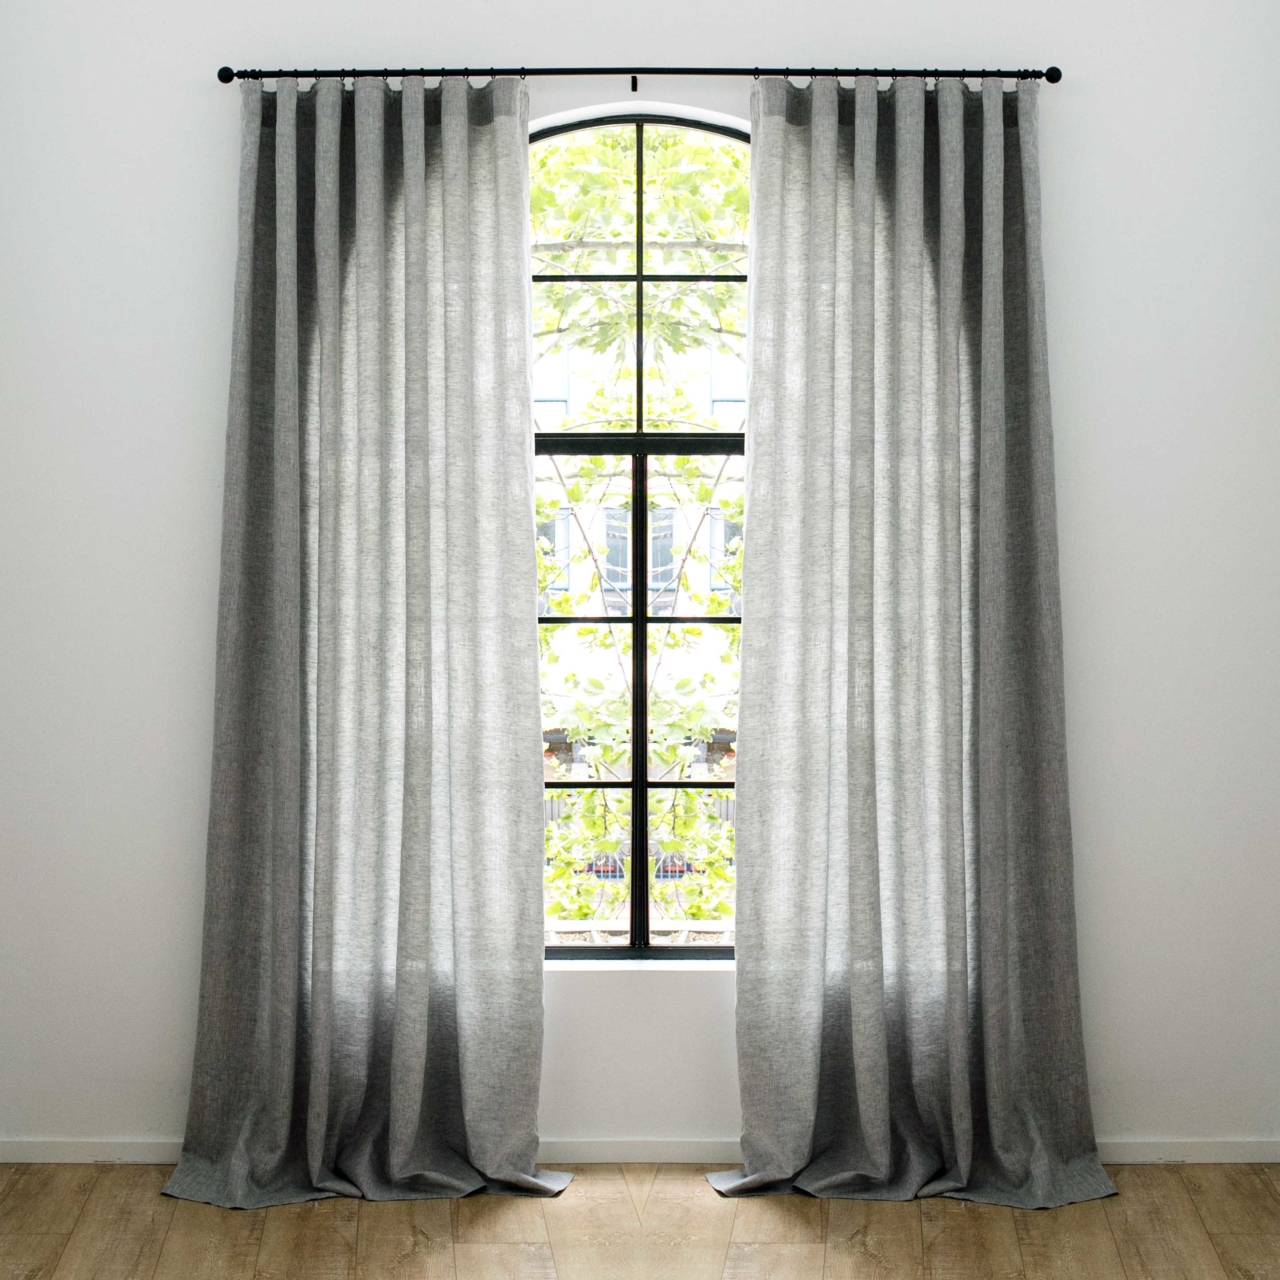 Affordable, custom linen curtains available online - The Interiors Addict